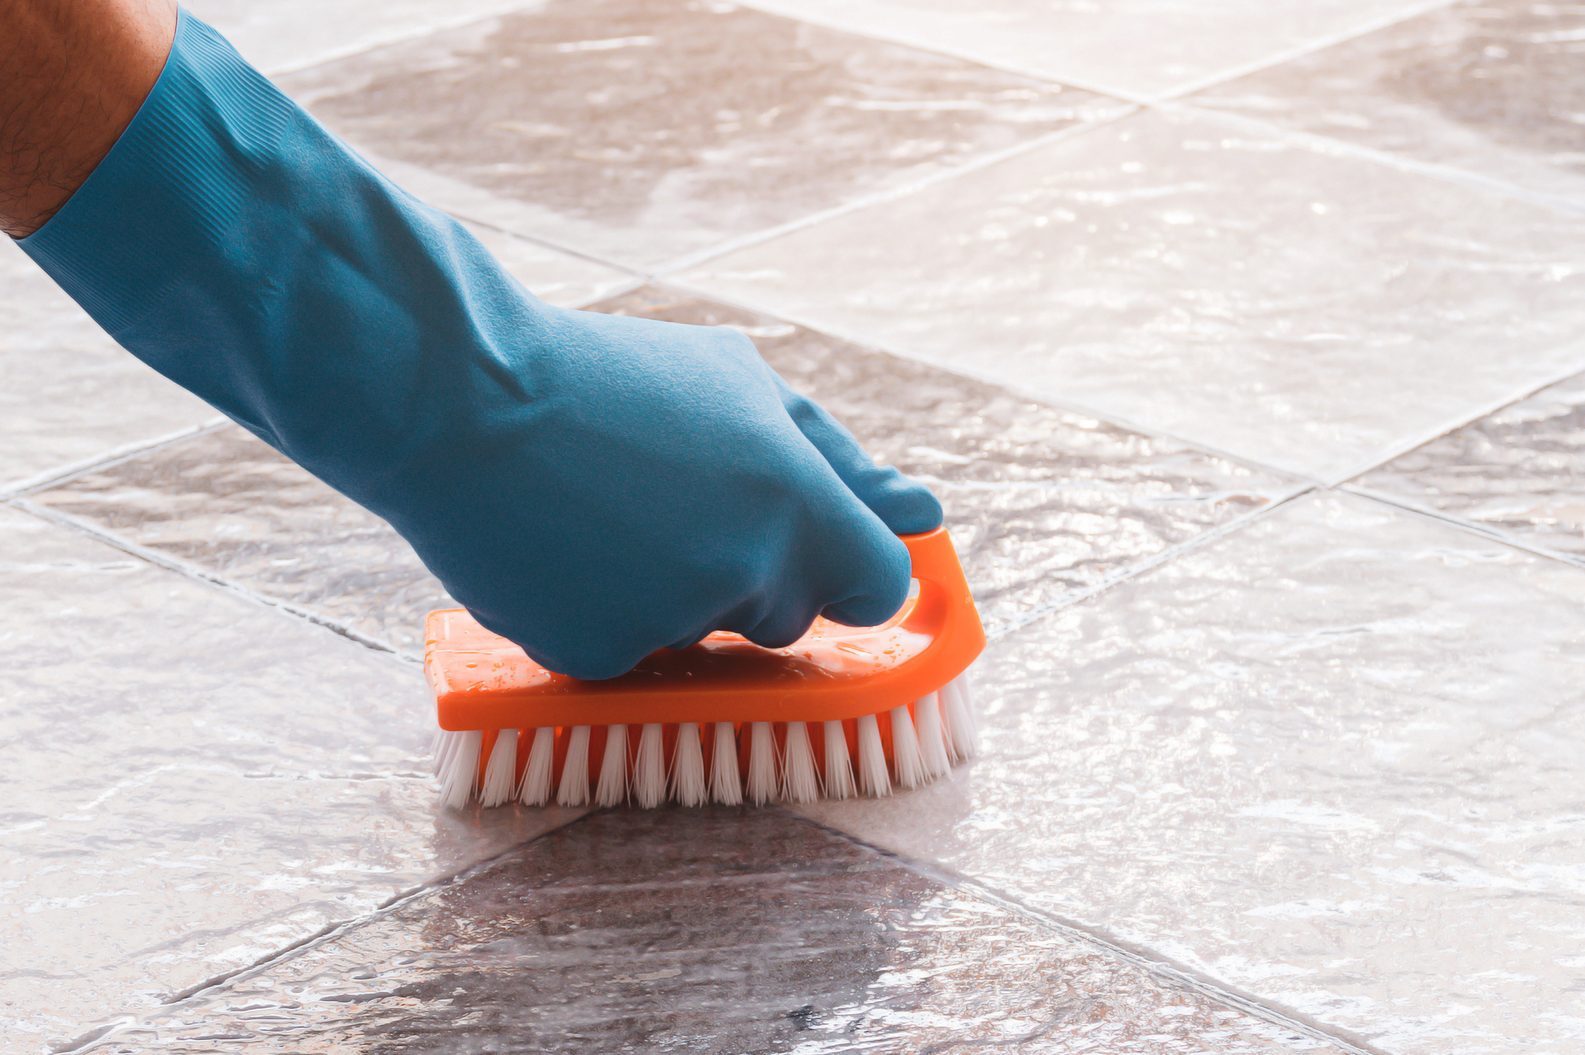 The official guide on how to clean grout and tile floors